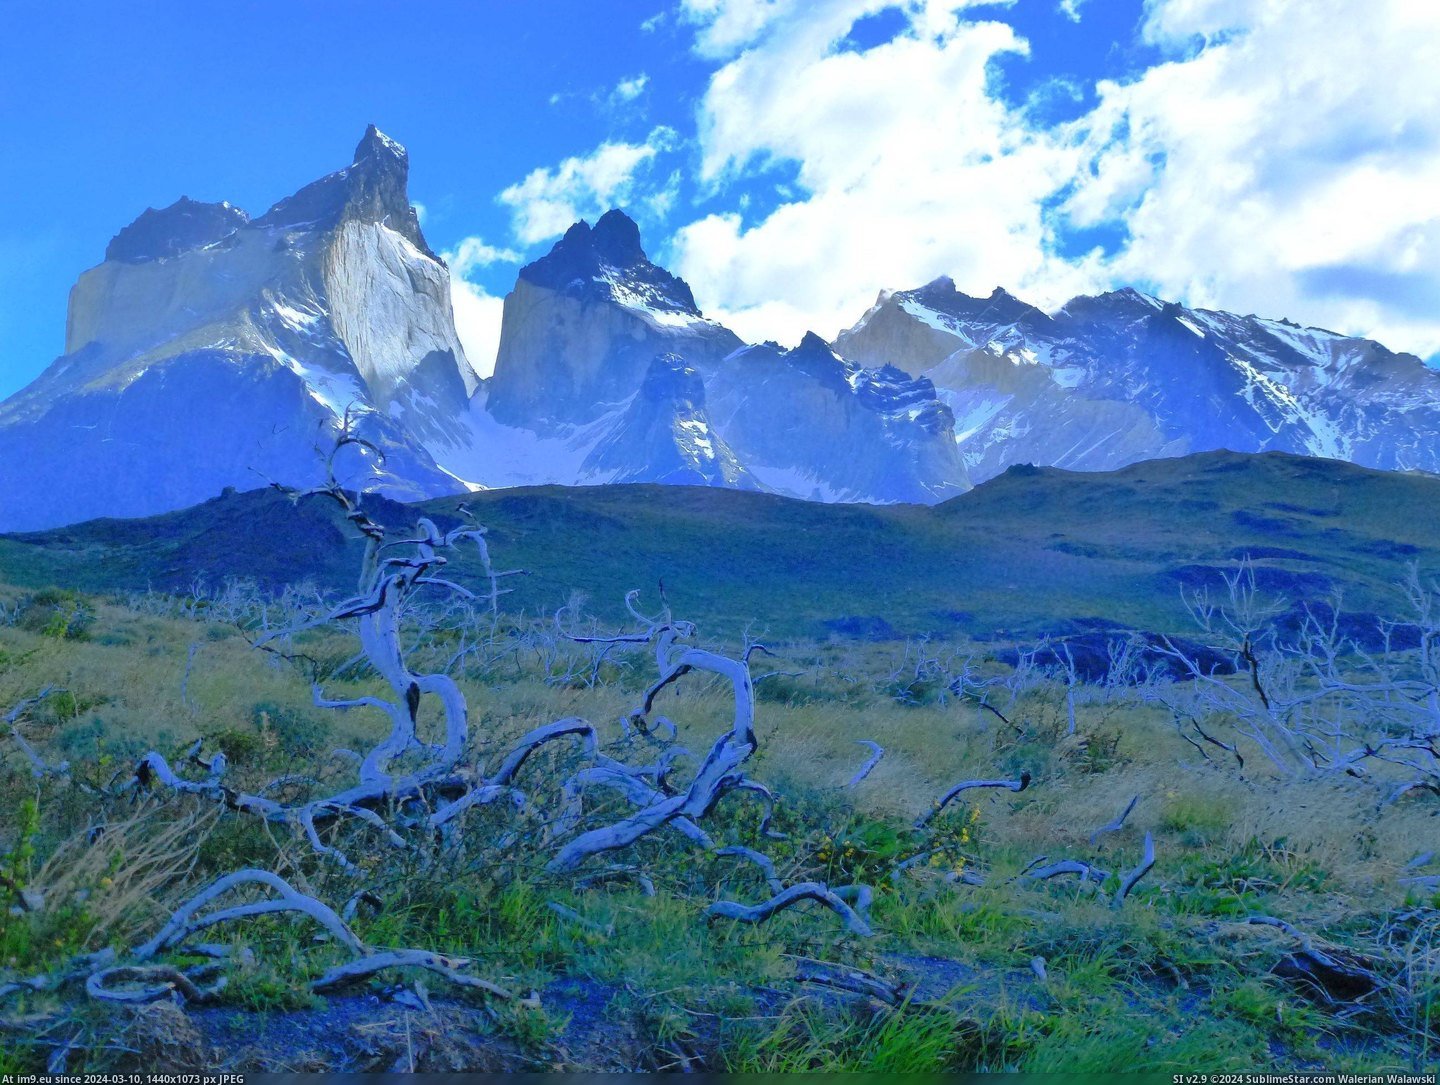 #Park #National #4320x3240 #Torres #Paine #Del #Chile [Earthporn] Torres del Paine National Park, Chile [4320x3240] [OC] Pic. (Изображение из альбом My r/EARTHPORN favs))